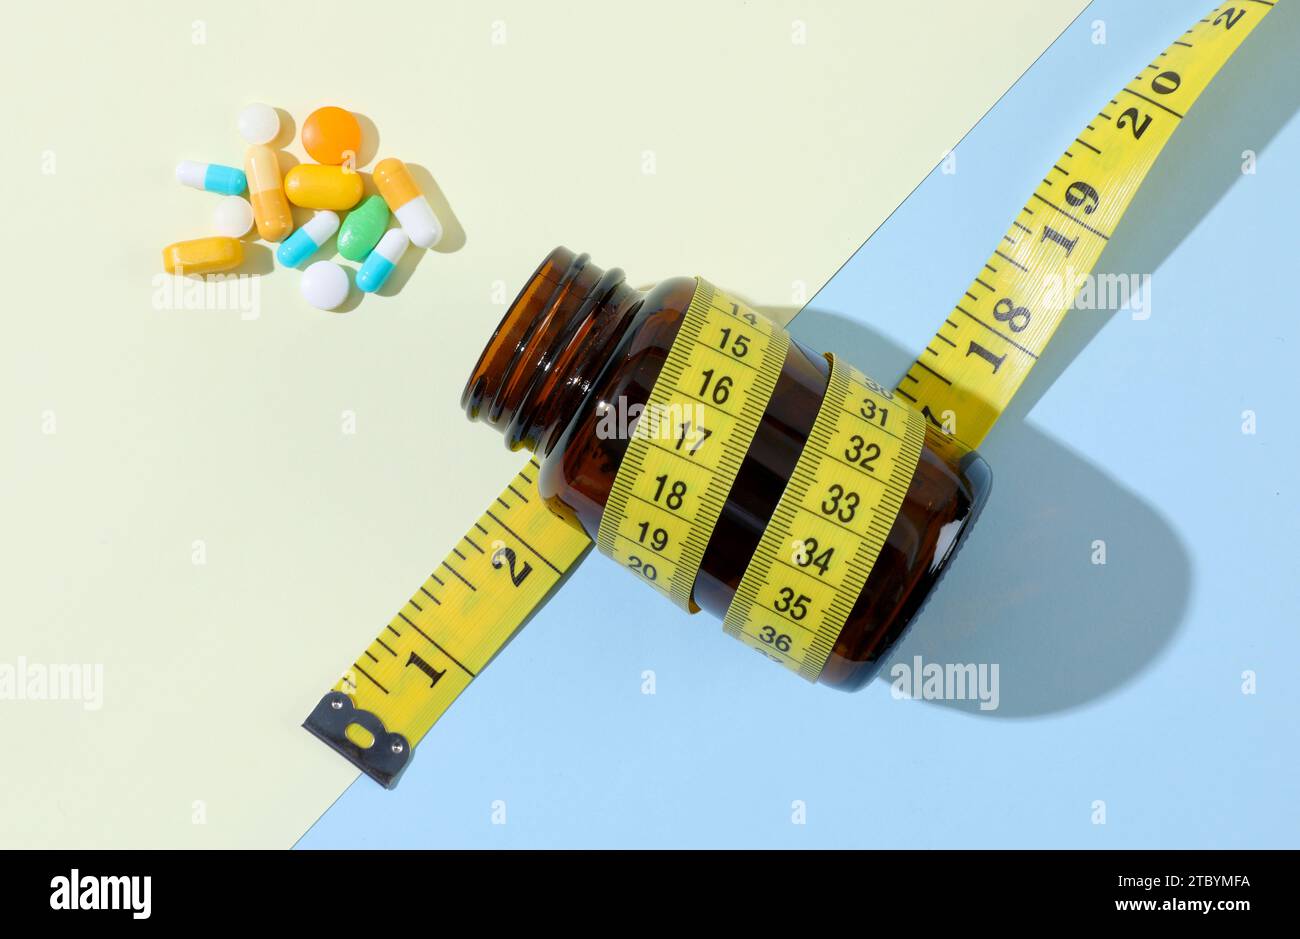 Diet pills and bottle of diet supplements with measuring tape Stock Photo